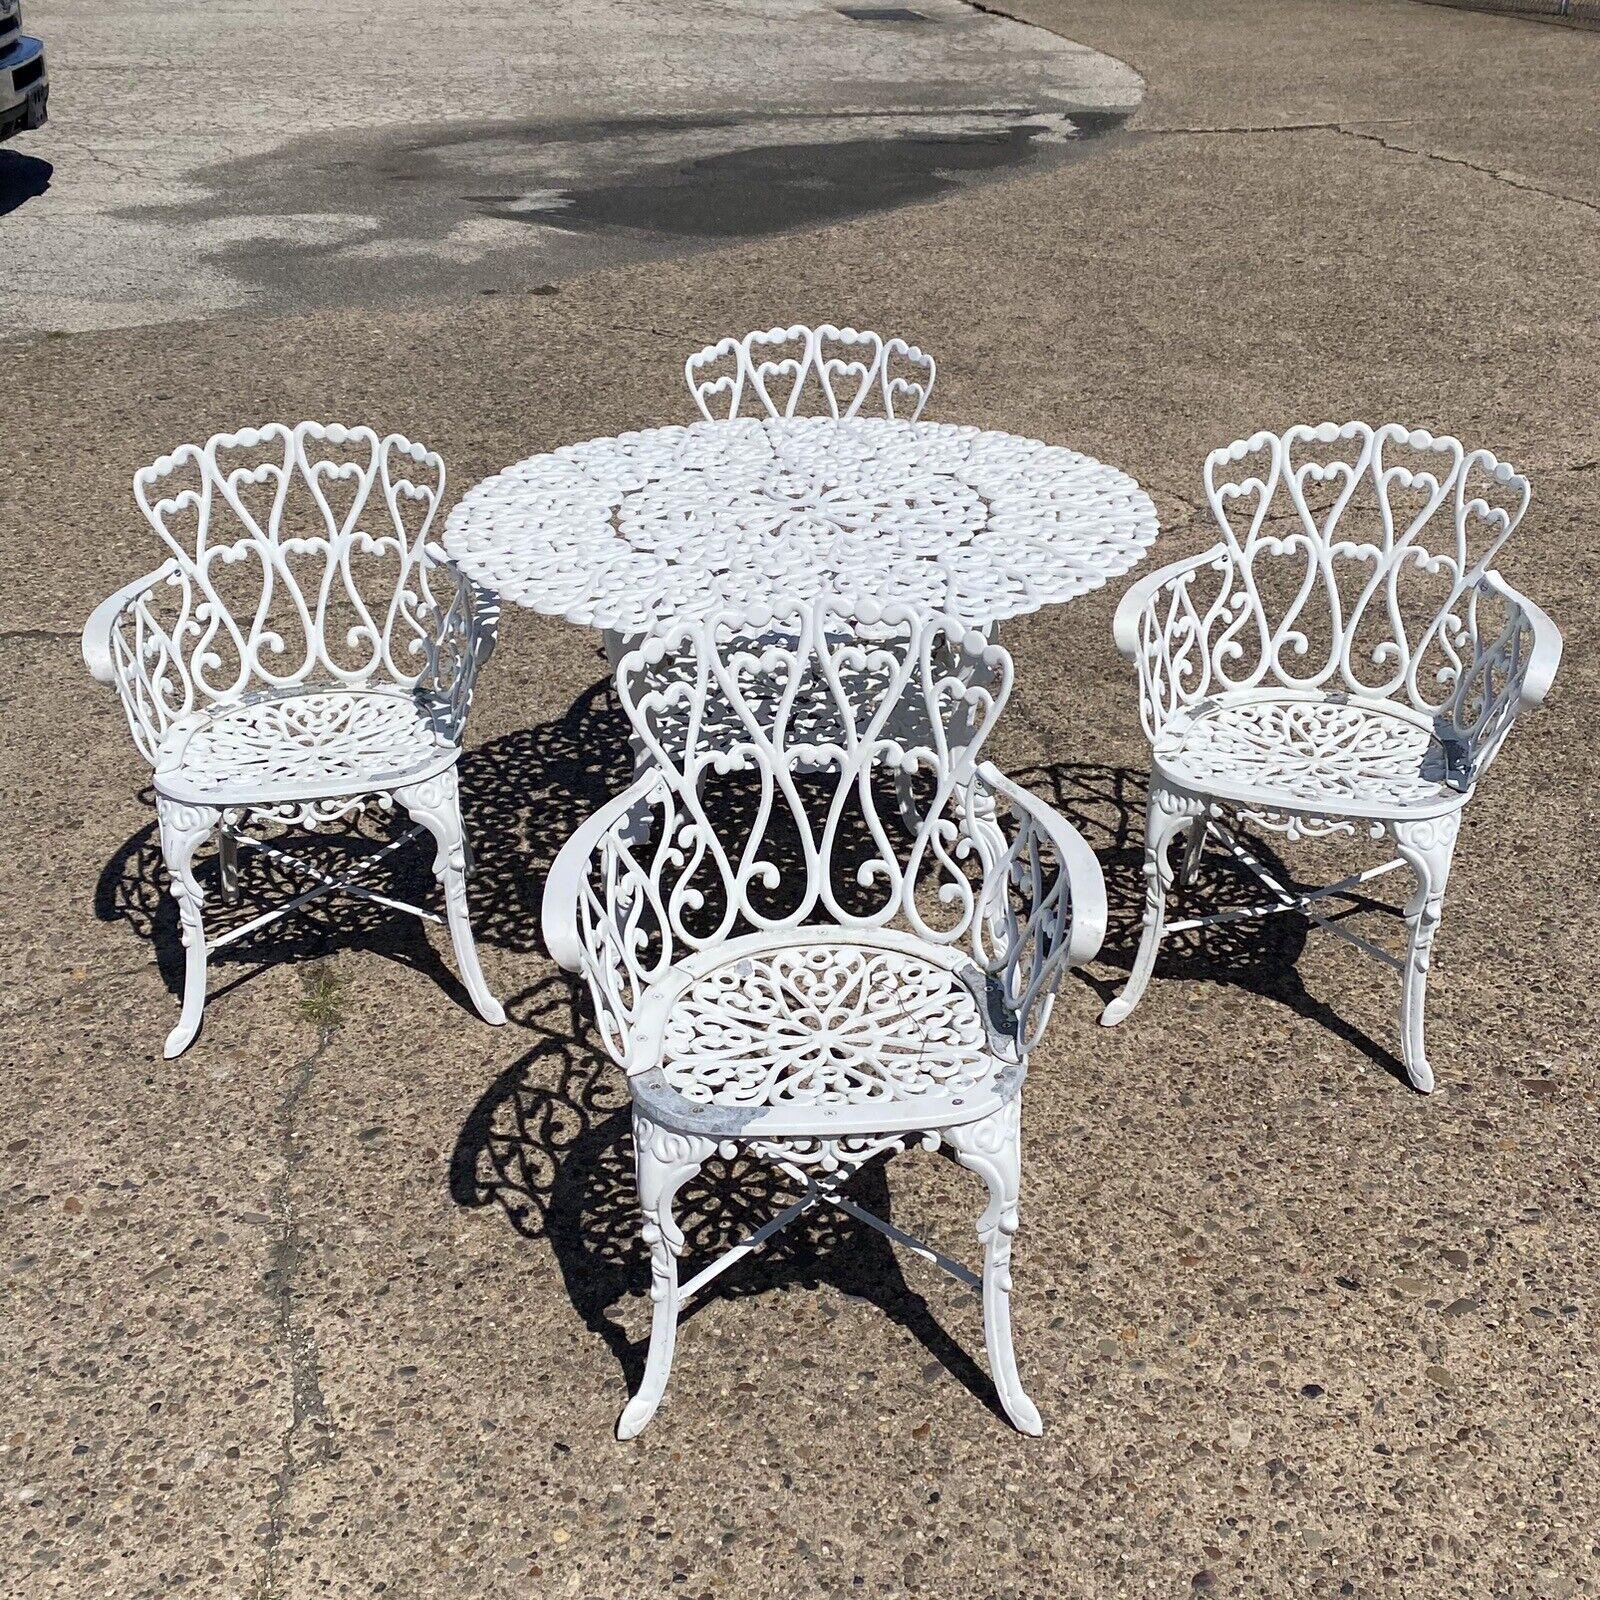 Victorian Style Cast Aluminum Scrolling Heart Back Garden Patio 3 Pc Bistro Set. Item features 4 heart back chairs, 1 round table with umbrella hold, scroll work throughout, white painted finish. Circa Late 20th Century Measurements: Chairs: 31